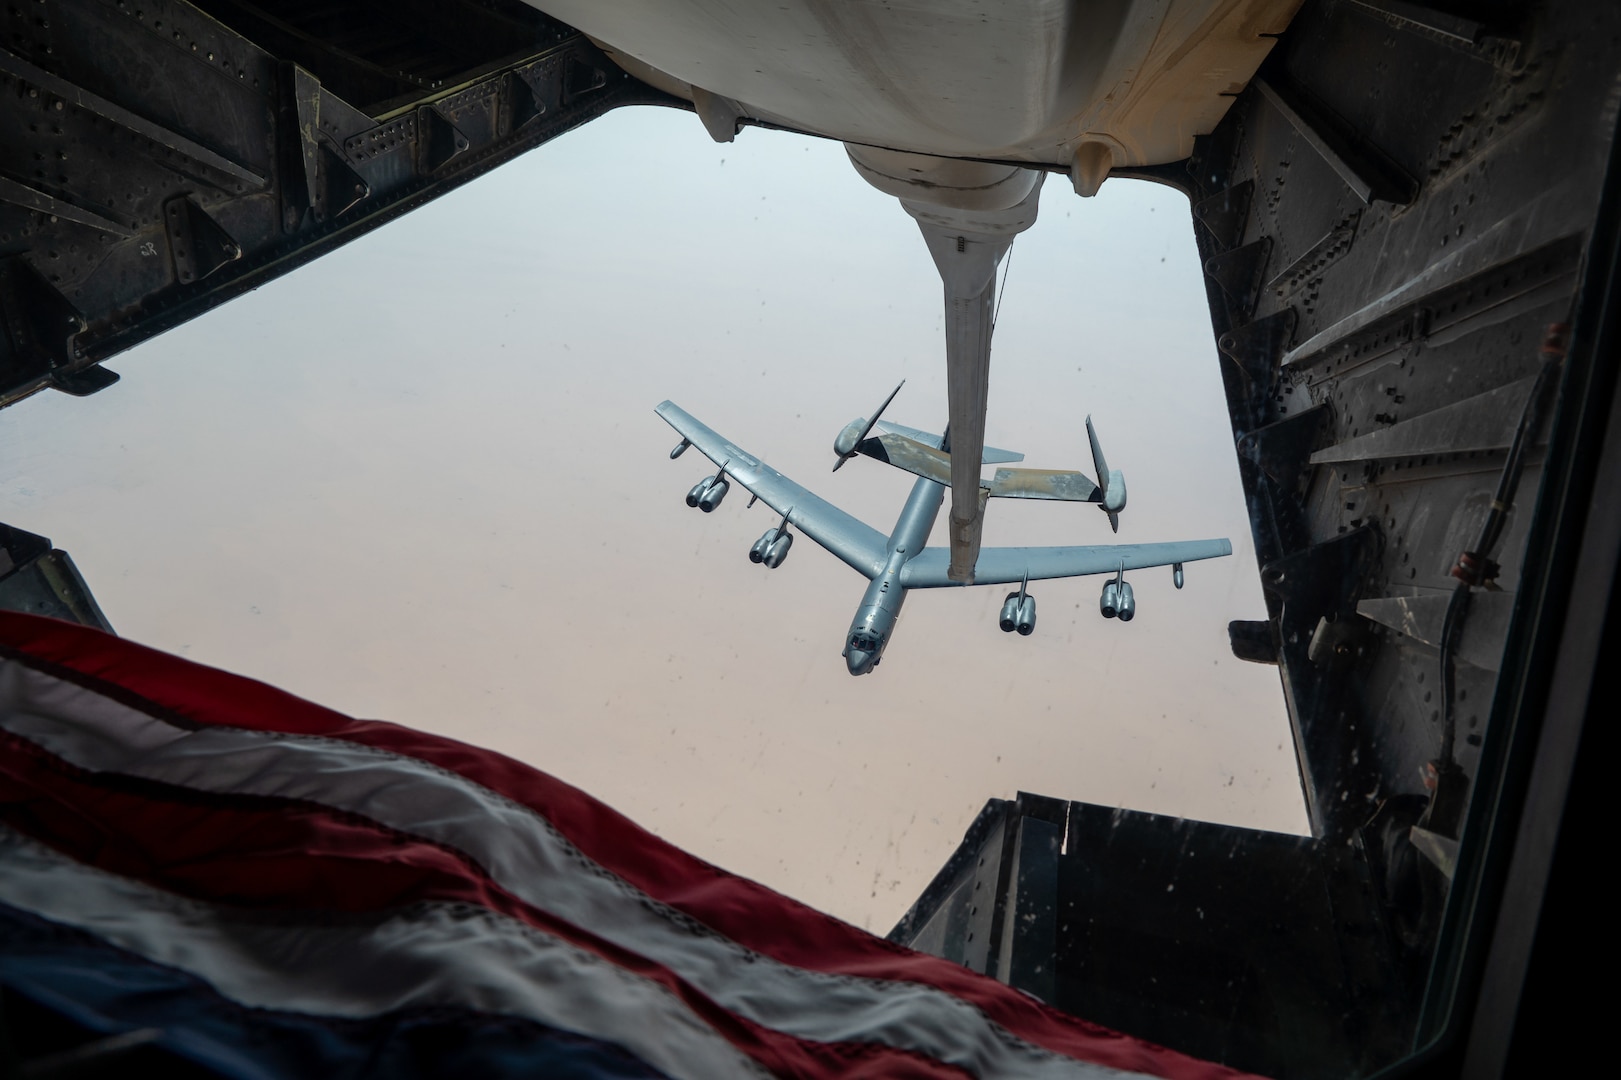 A U.S. Air Force B-52H Stratofortress, assigned to the 5th Bomb Wing, Minot Air Force Base, North Dakota, approaches a KC-10 Extender assigned to the 908th Expeditionary Air Refueling Squadron, Prince Sultan Air Base, Kingdom of Saudi Arabia, for air refueling support, during a Bomber Task Force mission, over the U.S. Central Command area of responsibility, Sept. 4, 2022. BTF missions demonstrate the U.S.’s commitment to regional security and stability by showing how the U.S. will decisively respond to threats against U.S., coalition and partner forces. (U.S. Air Force photo by Staff Sgt. Shannon Bowman)